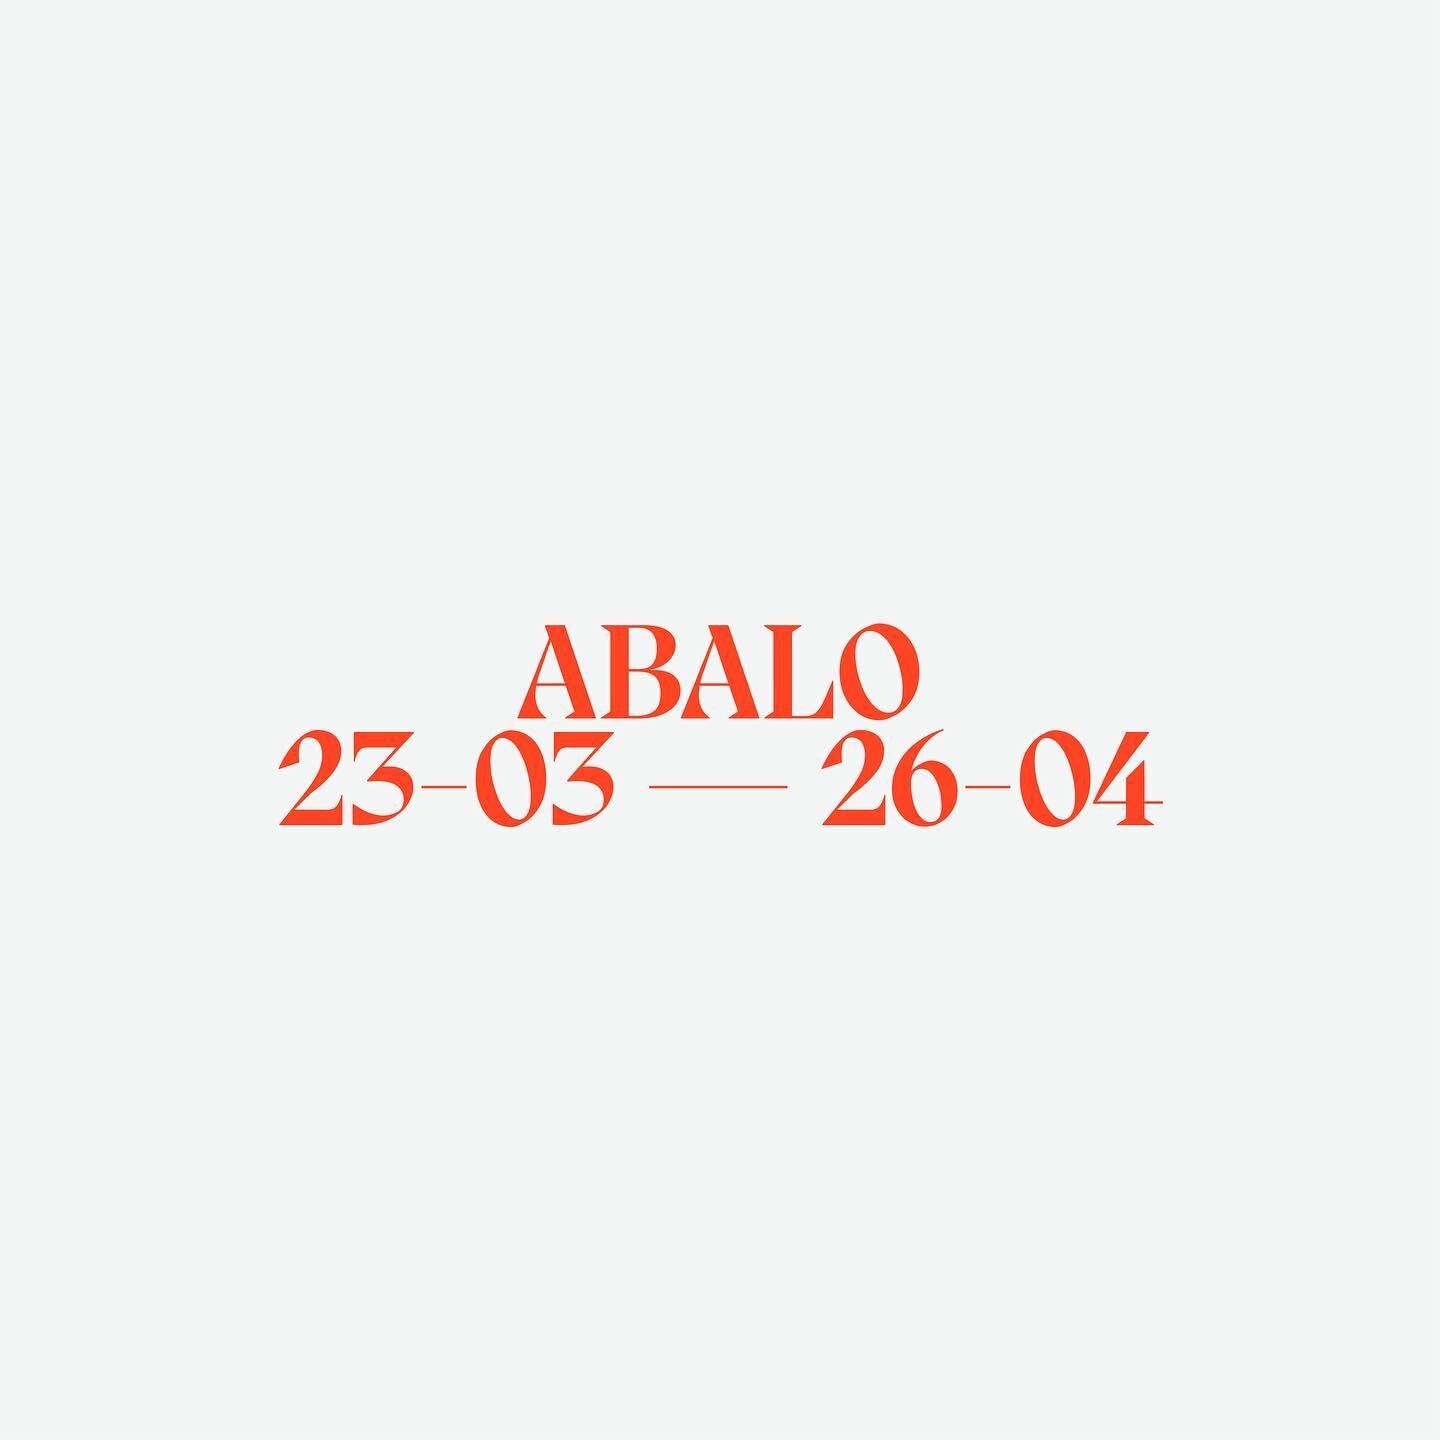 NEXT EXHIBITION
&rsquo;ABALO&rsquo;, by @manueltainha and @matildetravassos 
Opening - 23rd March 2024, 4pm

The inevitable finiteness of being and things, and the obsession with their evocation through mise-en-scene and images, as well as the idea o